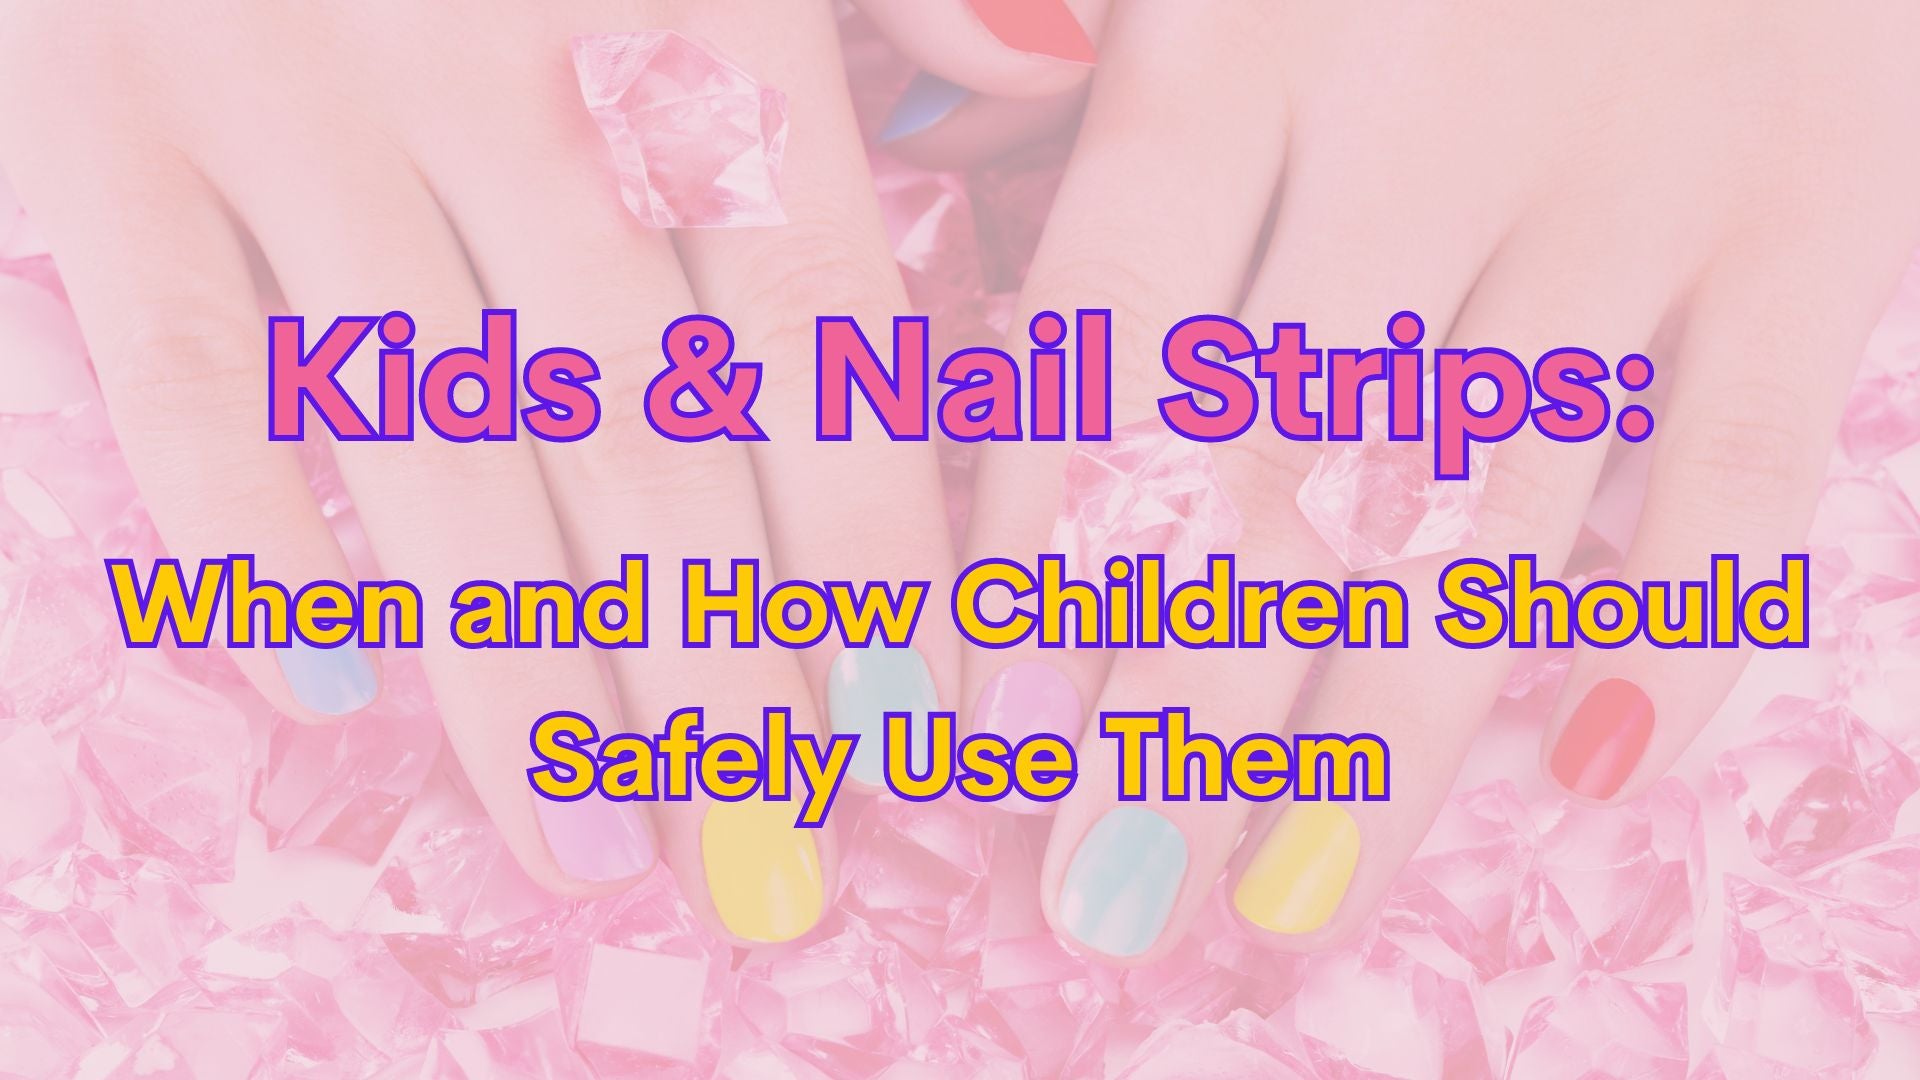 Is it Safe For Kids to Wear Gel Nail Strips? When and How Children Should Use Them.